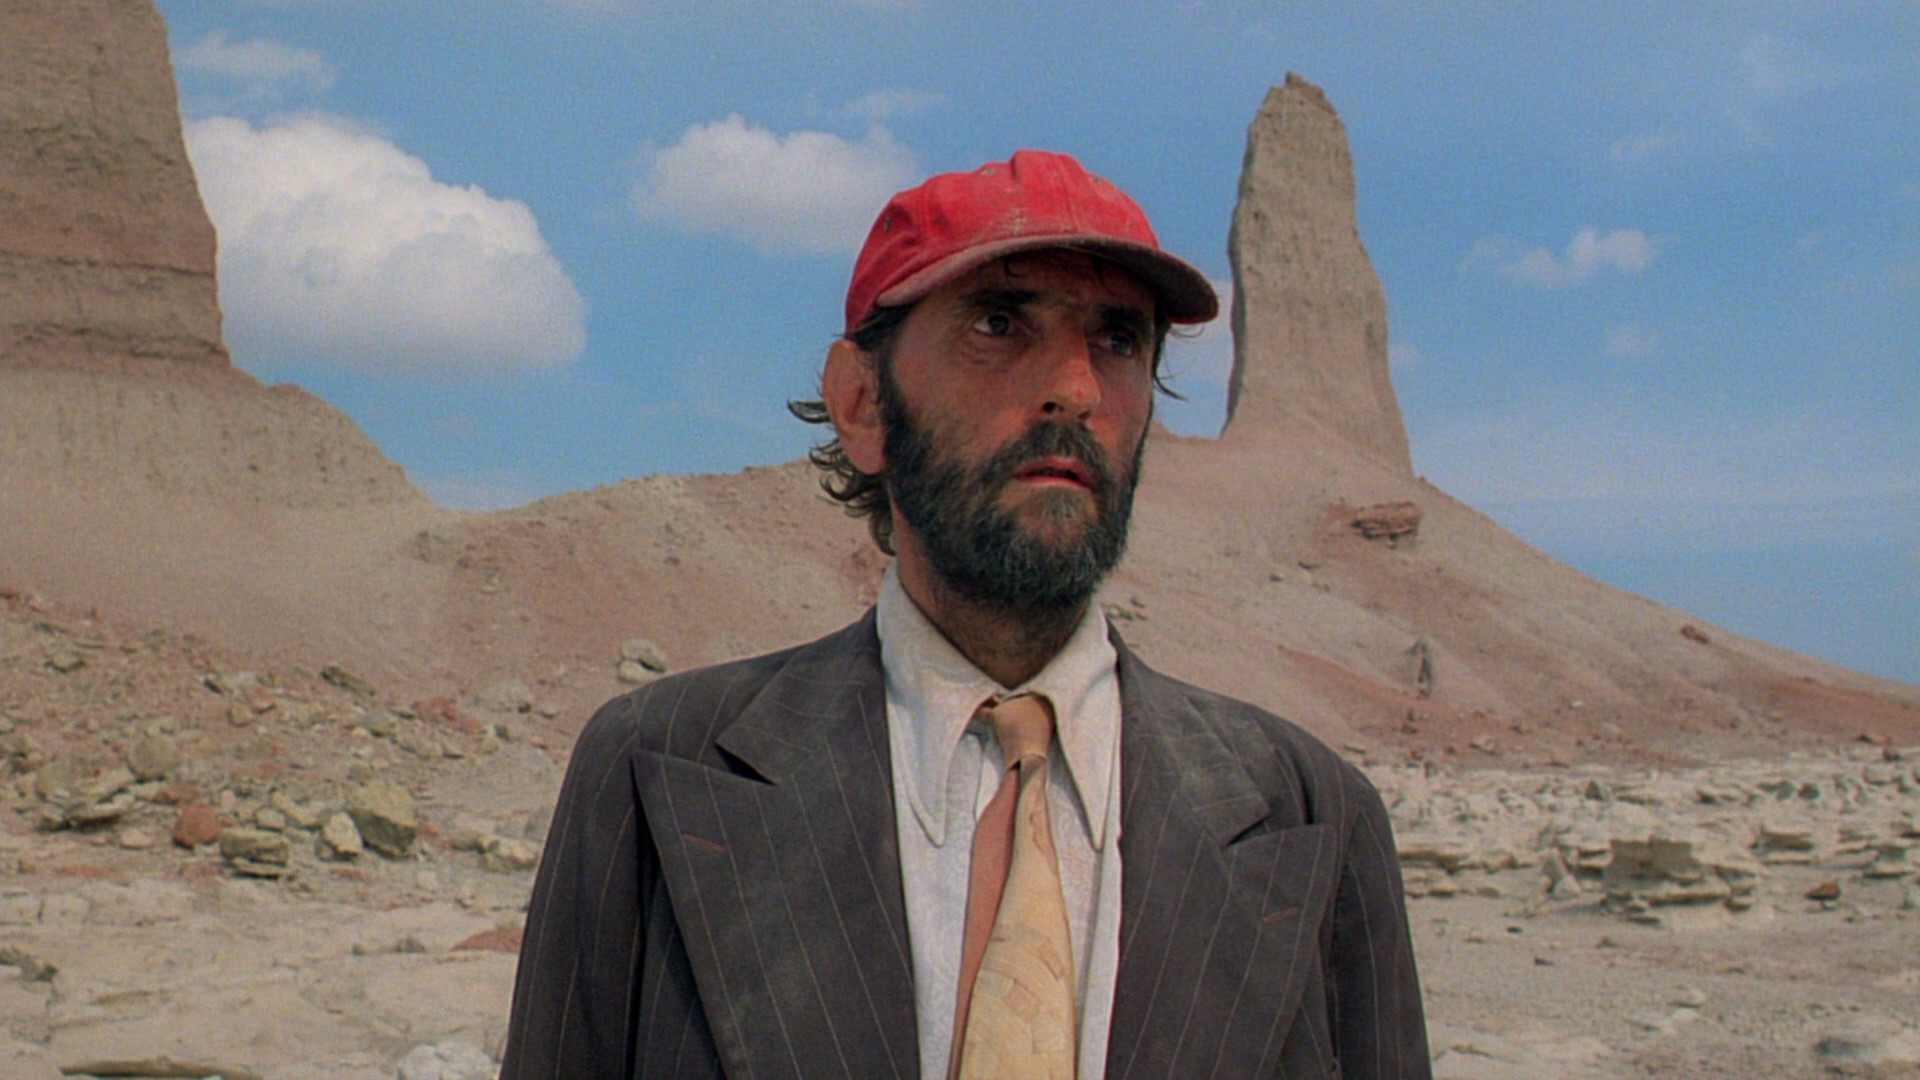 Free Download Paris Texas Movie Review Film Summary 1984 Roger Ebert [1920x1080] For Your